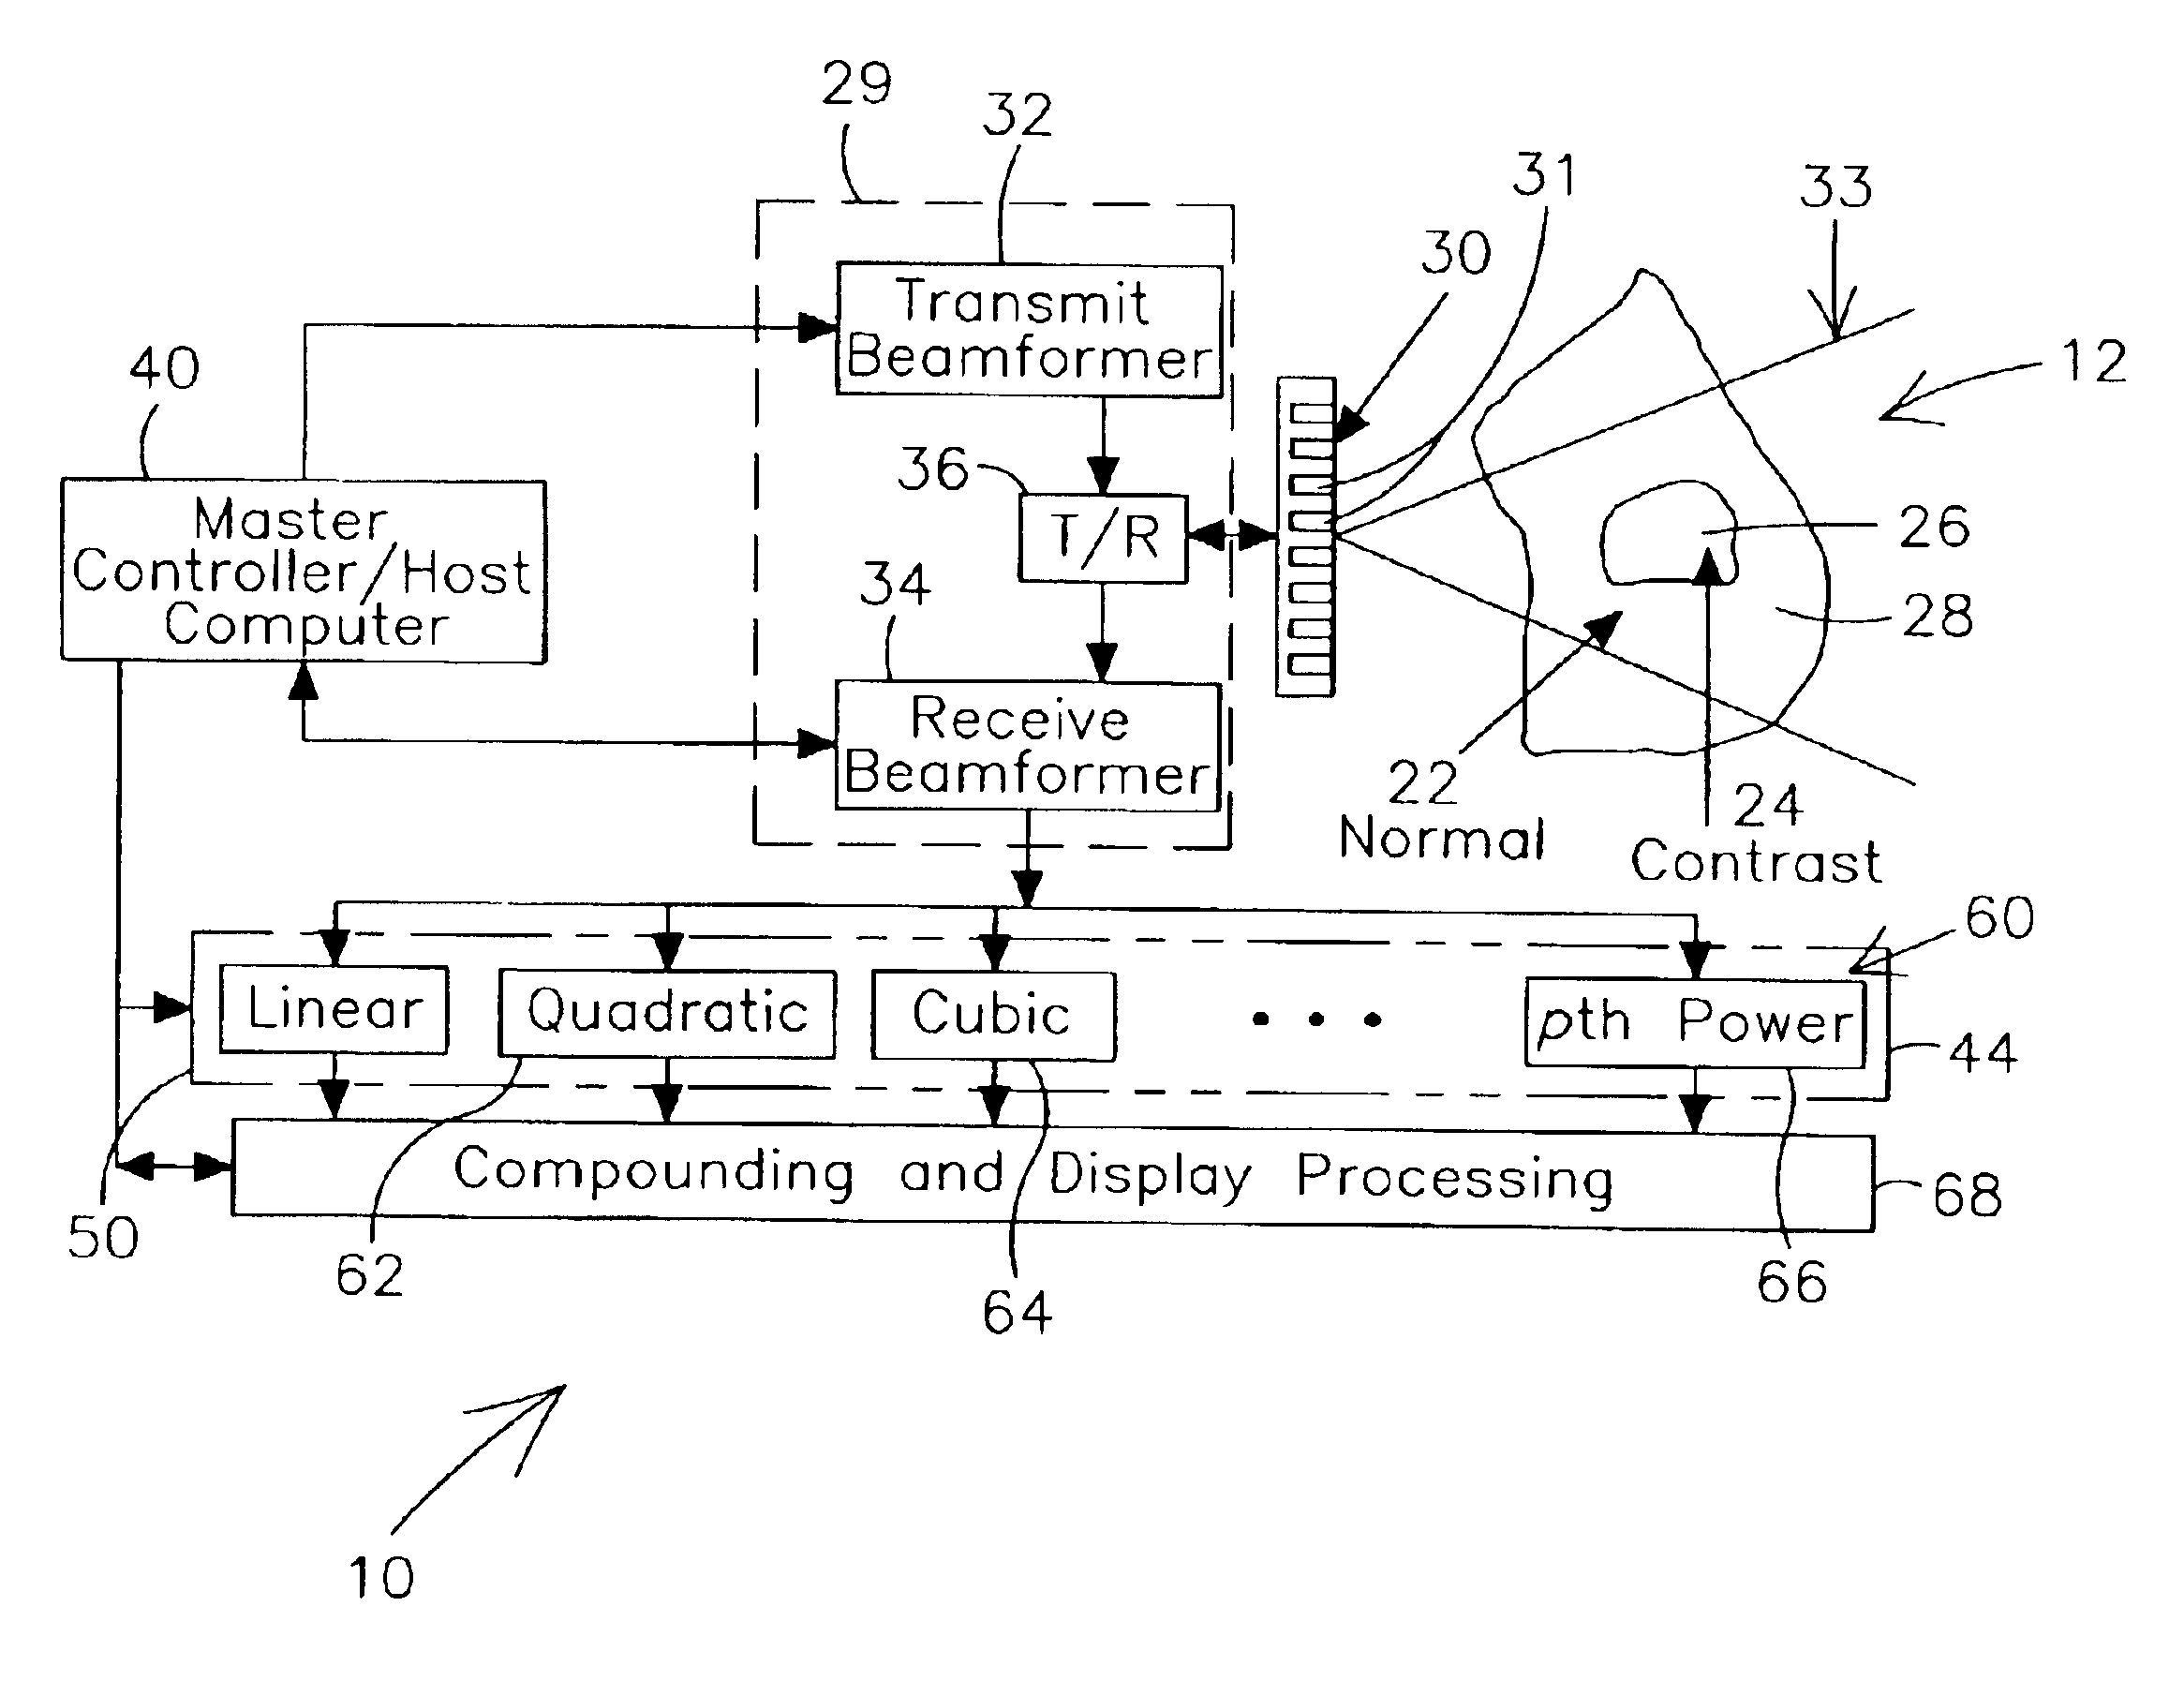 Ultrasound imaging system and method using non-linear post-beamforming filter